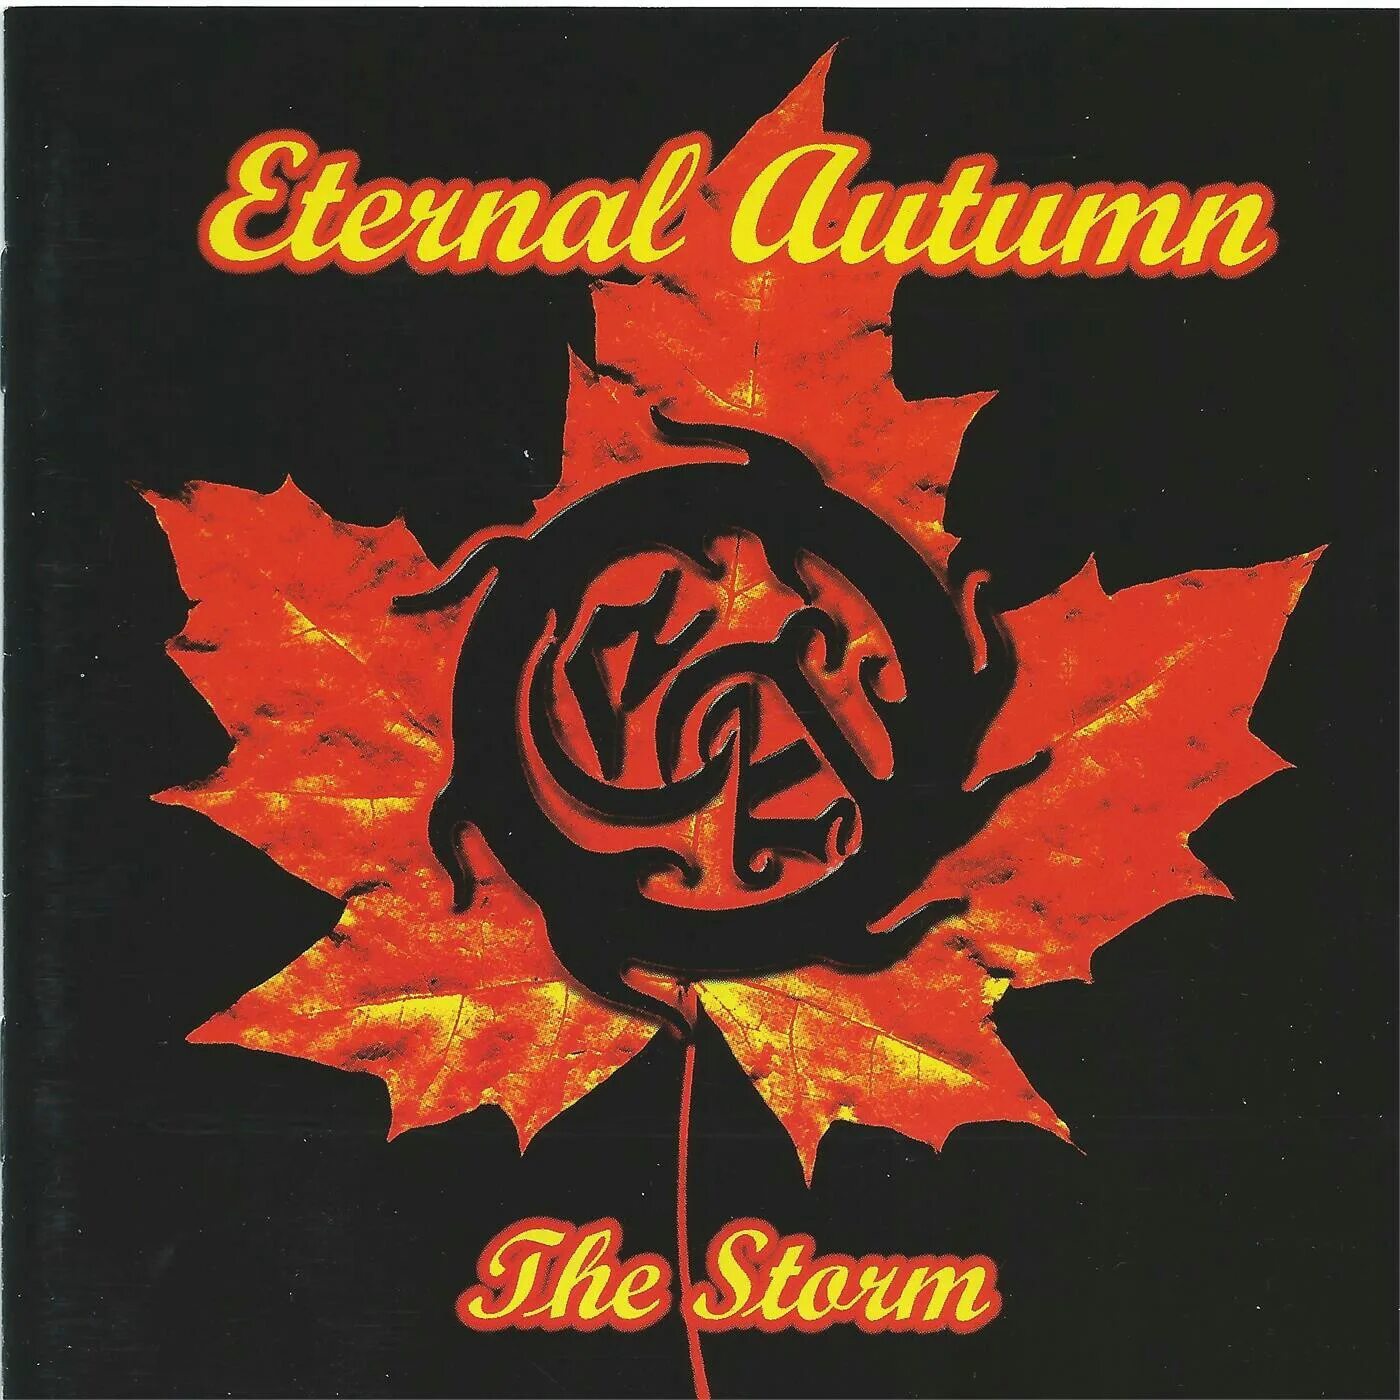 Eternal autumn - 1998 - the Storm. Eternal Band. A Song of Storm and Fire. Last autumn's Dream.